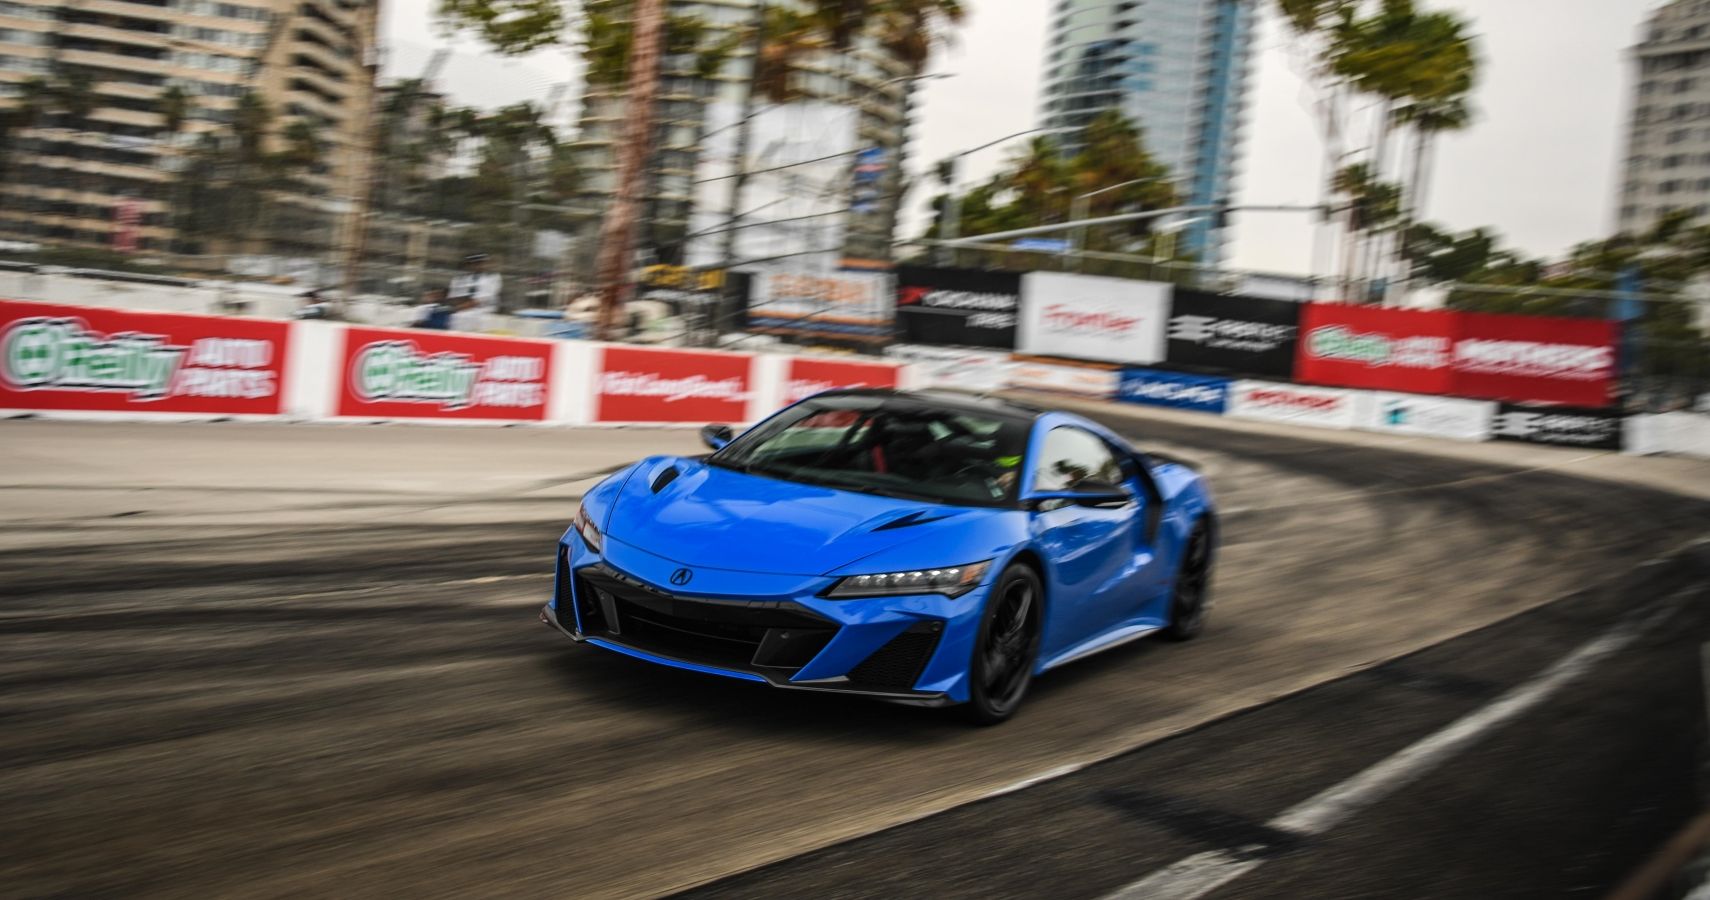 Acura NSX Long Beach Record Featured Image